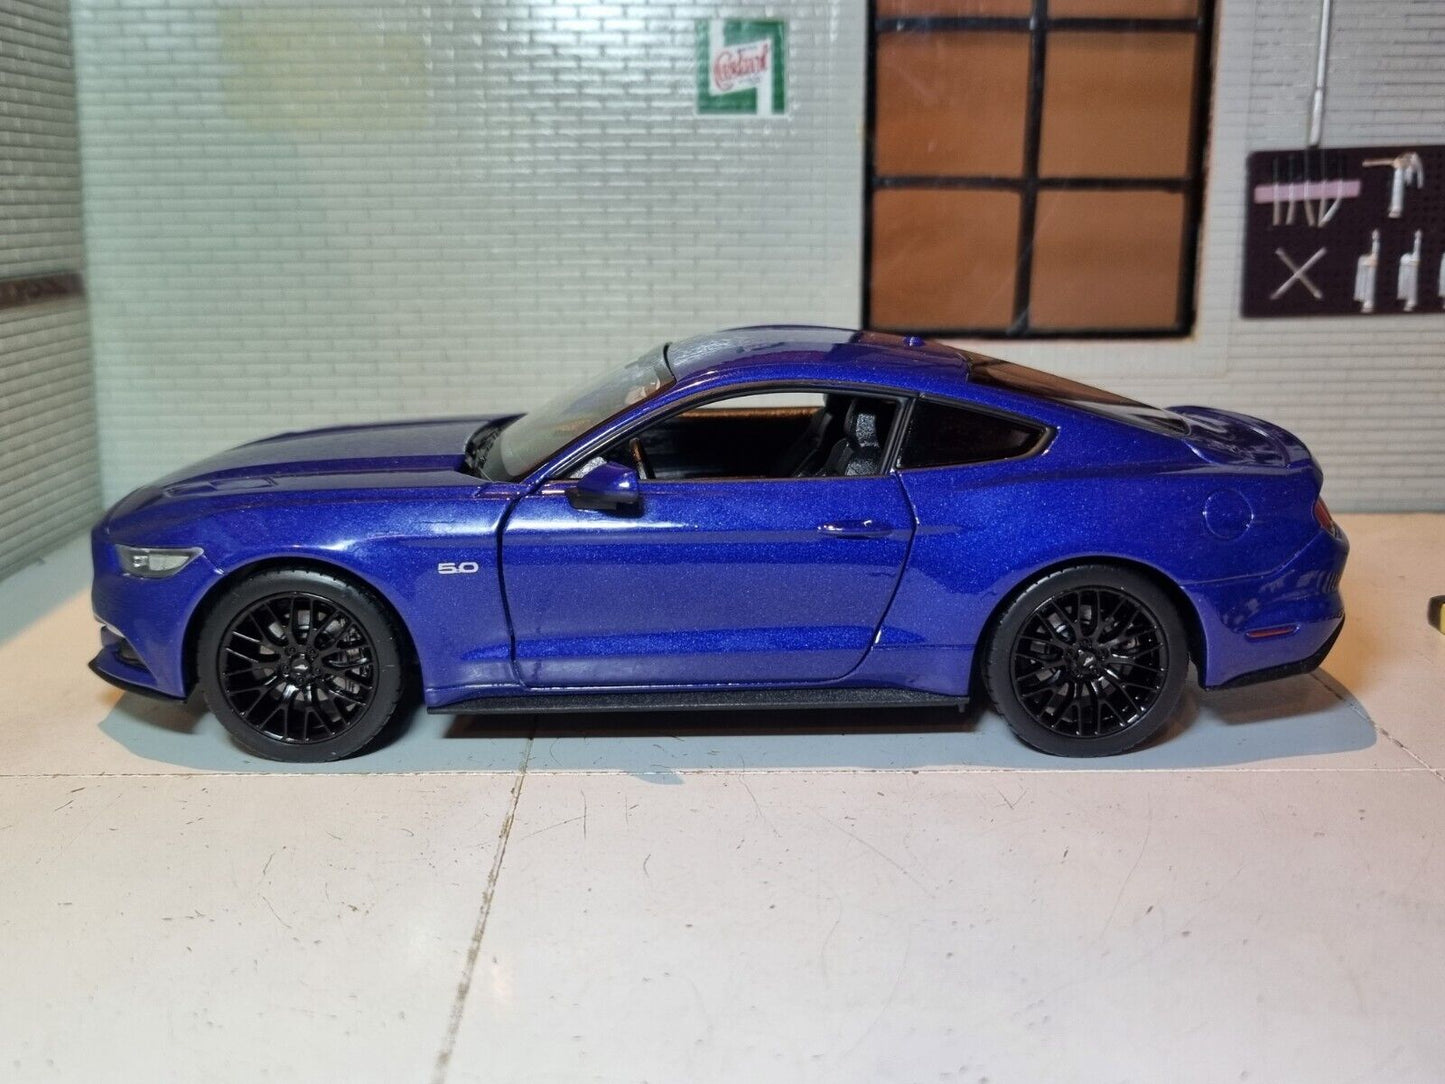 Ford Mustang 2015 24062 1:24